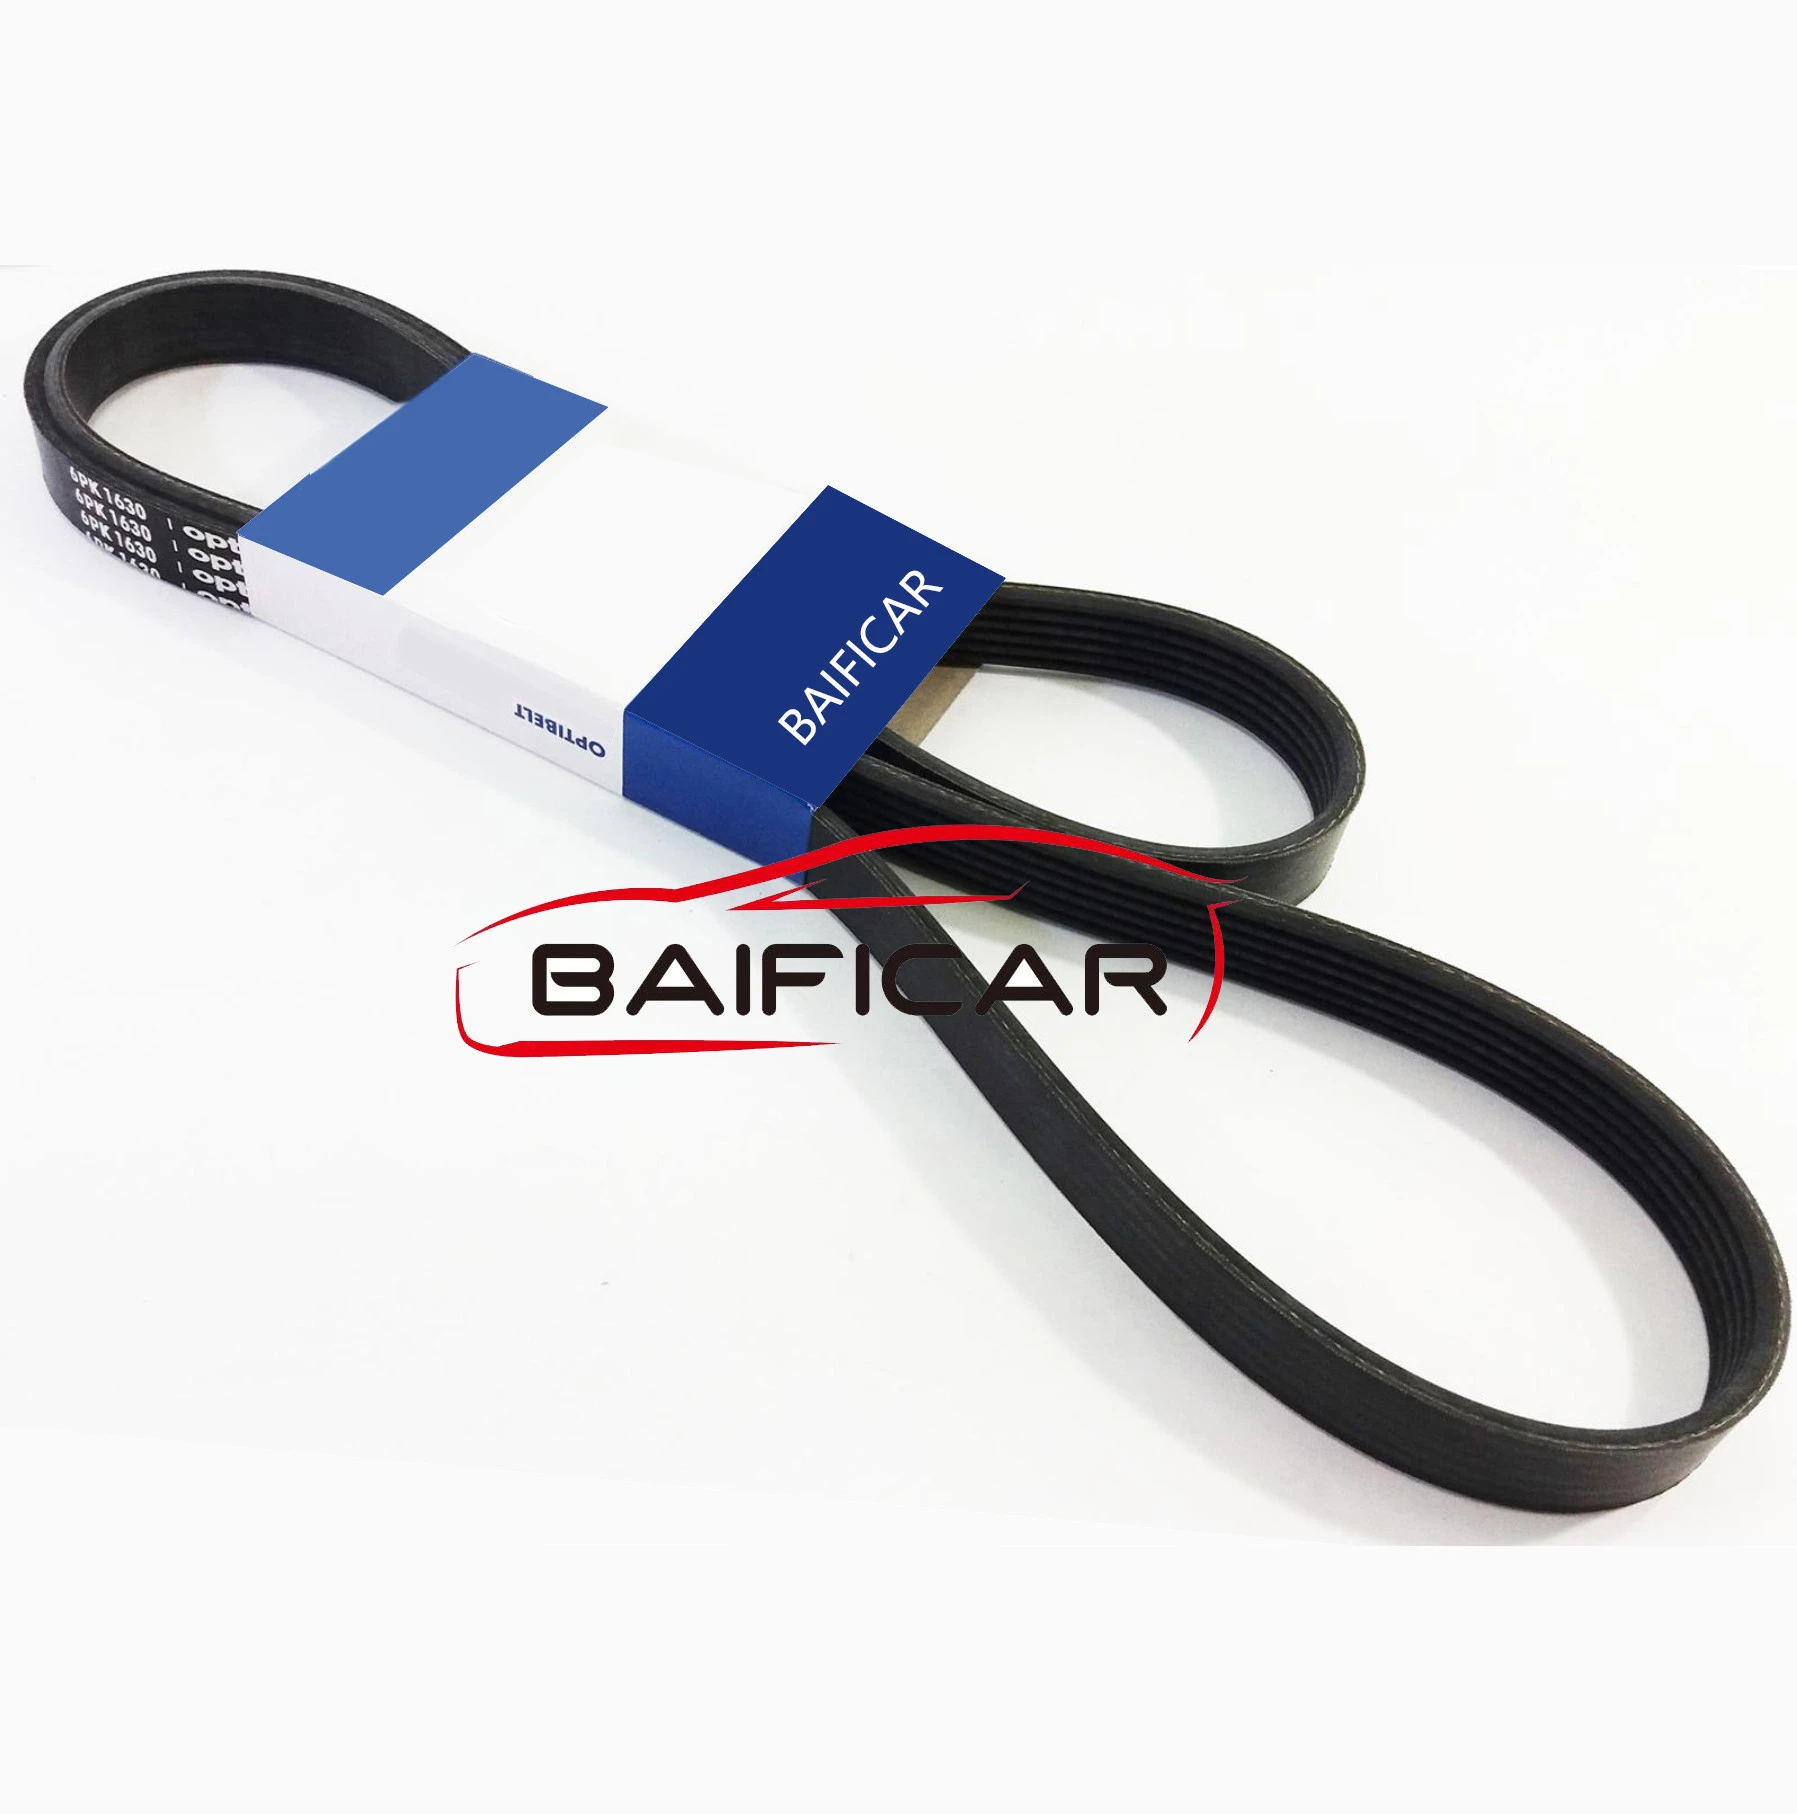 baifi powerdrive Industrial belt for 1760-HTD8M-12PK Combination Of Multiple V-ribbed Belt And Timing Belt Double 1760-8m-12pk